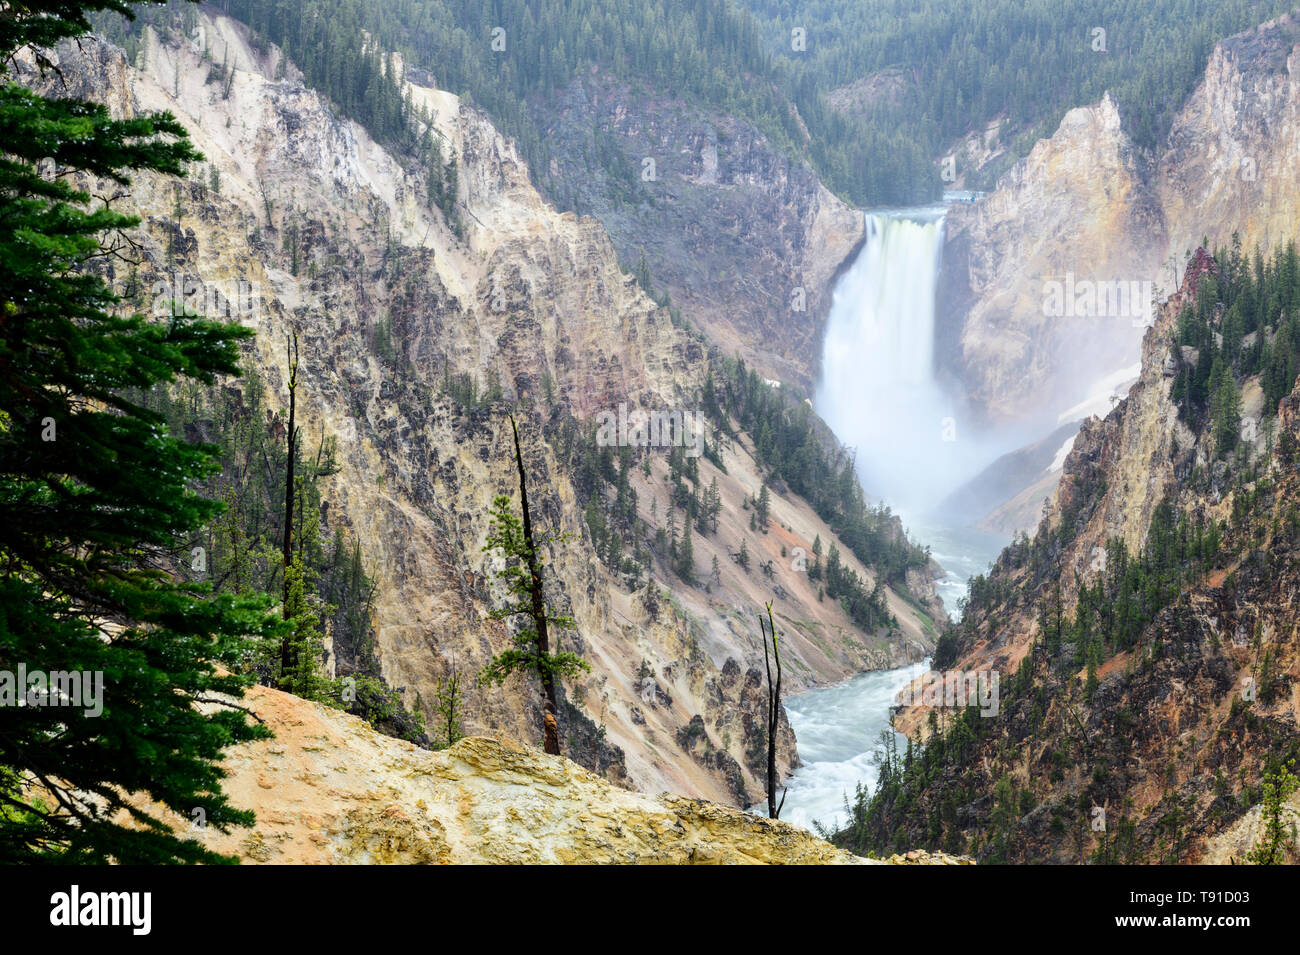 The Yellowstone River flows over the Lower Yellowstone Falls into the Grand Canyon of the Yellowstone.  It's in Yellowstone National Park in Wyoming USA. Stock Photo